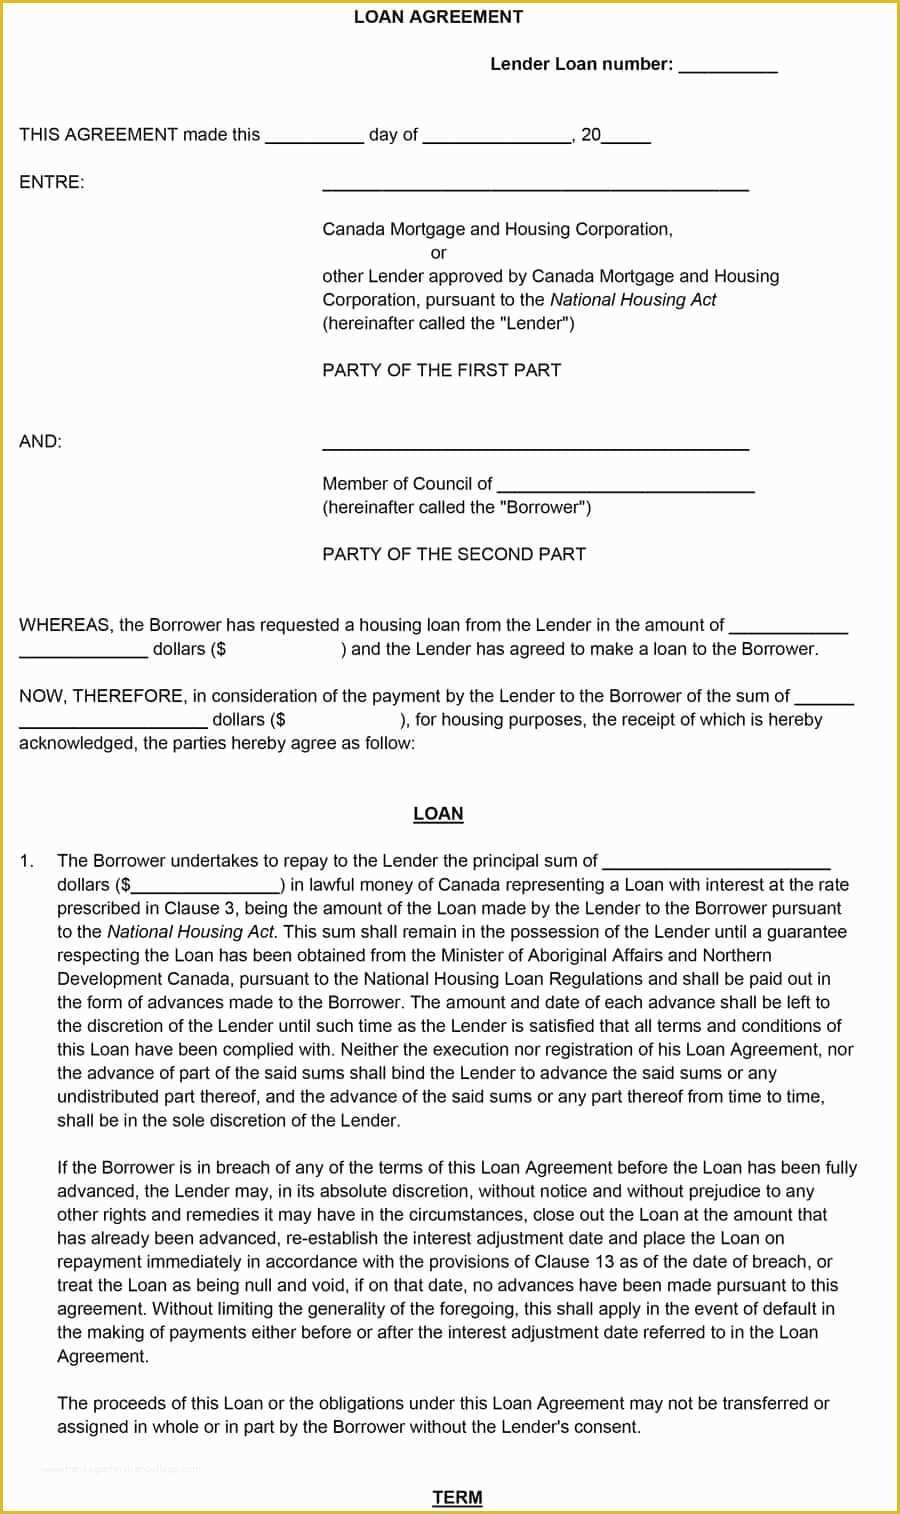 Free Loan Agreement Template Of 40 Free Loan Agreement Templates [word & Pdf] Template Lab